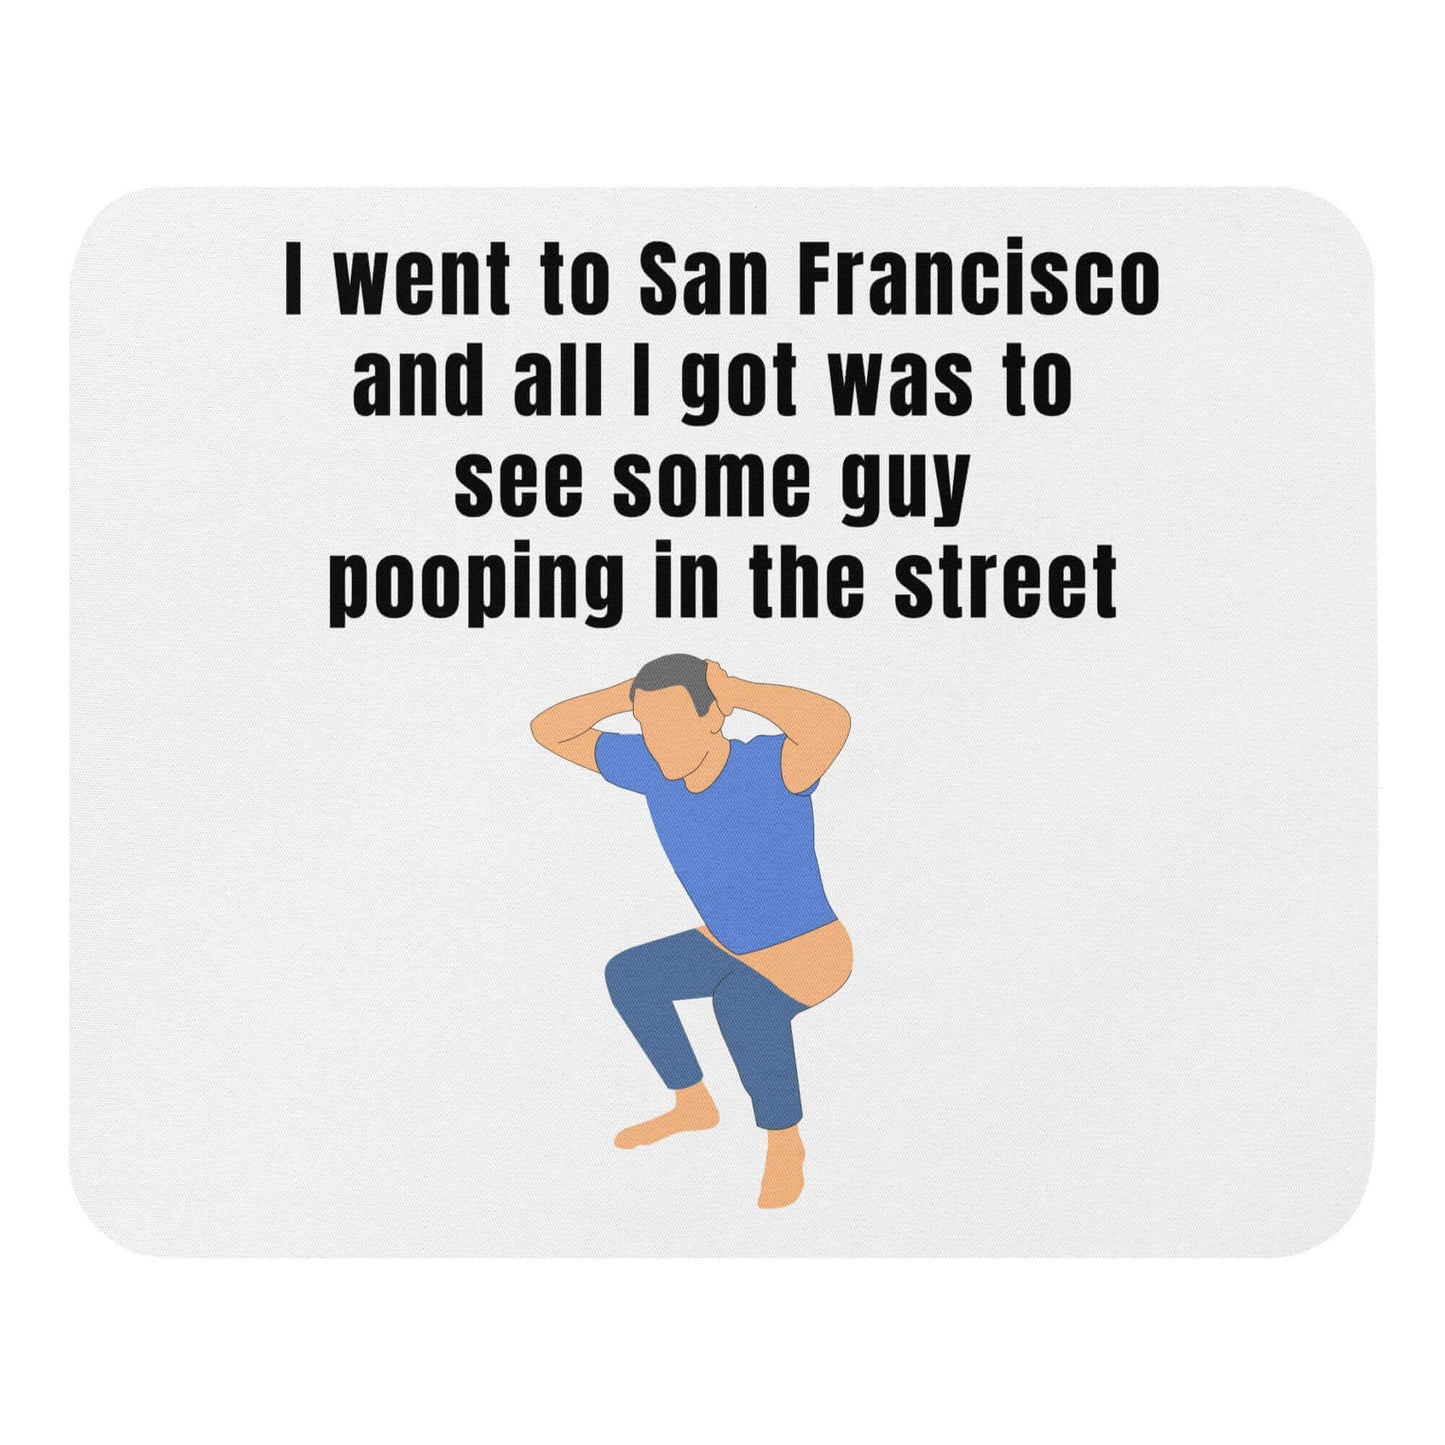 I went to San Francisco and all I got was to see some guy pooping in the street - Mouse pad CA California Democrats Newsrom politicians Pooping San Francisco SanFrancisco